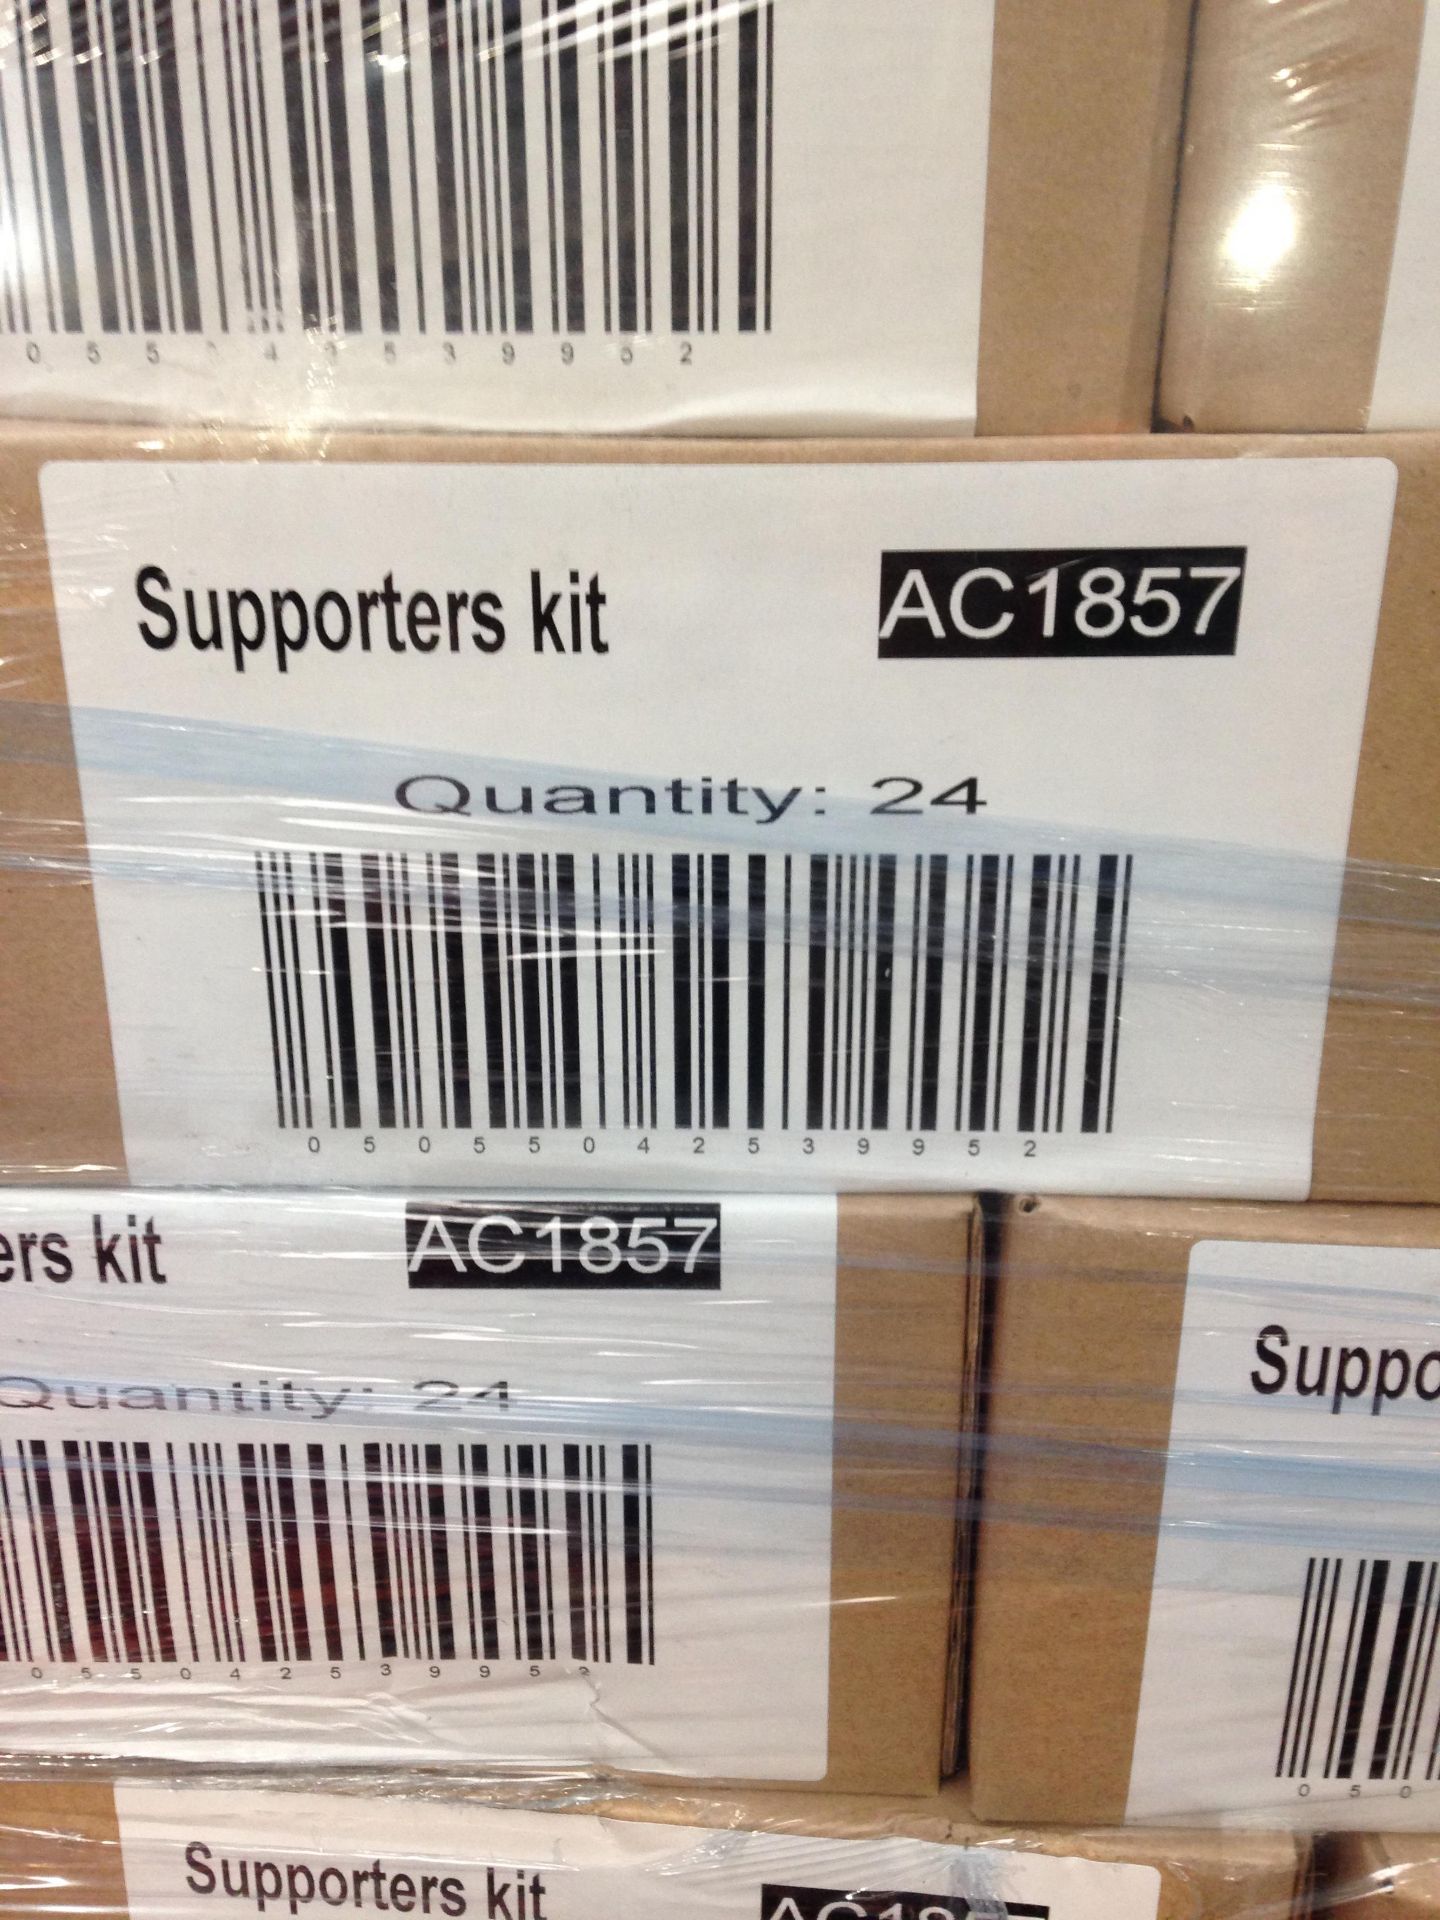 Pallet No- 1055 - Pallet of approx 320 boxes of tax disc holders - 24 per box - Image 3 of 3